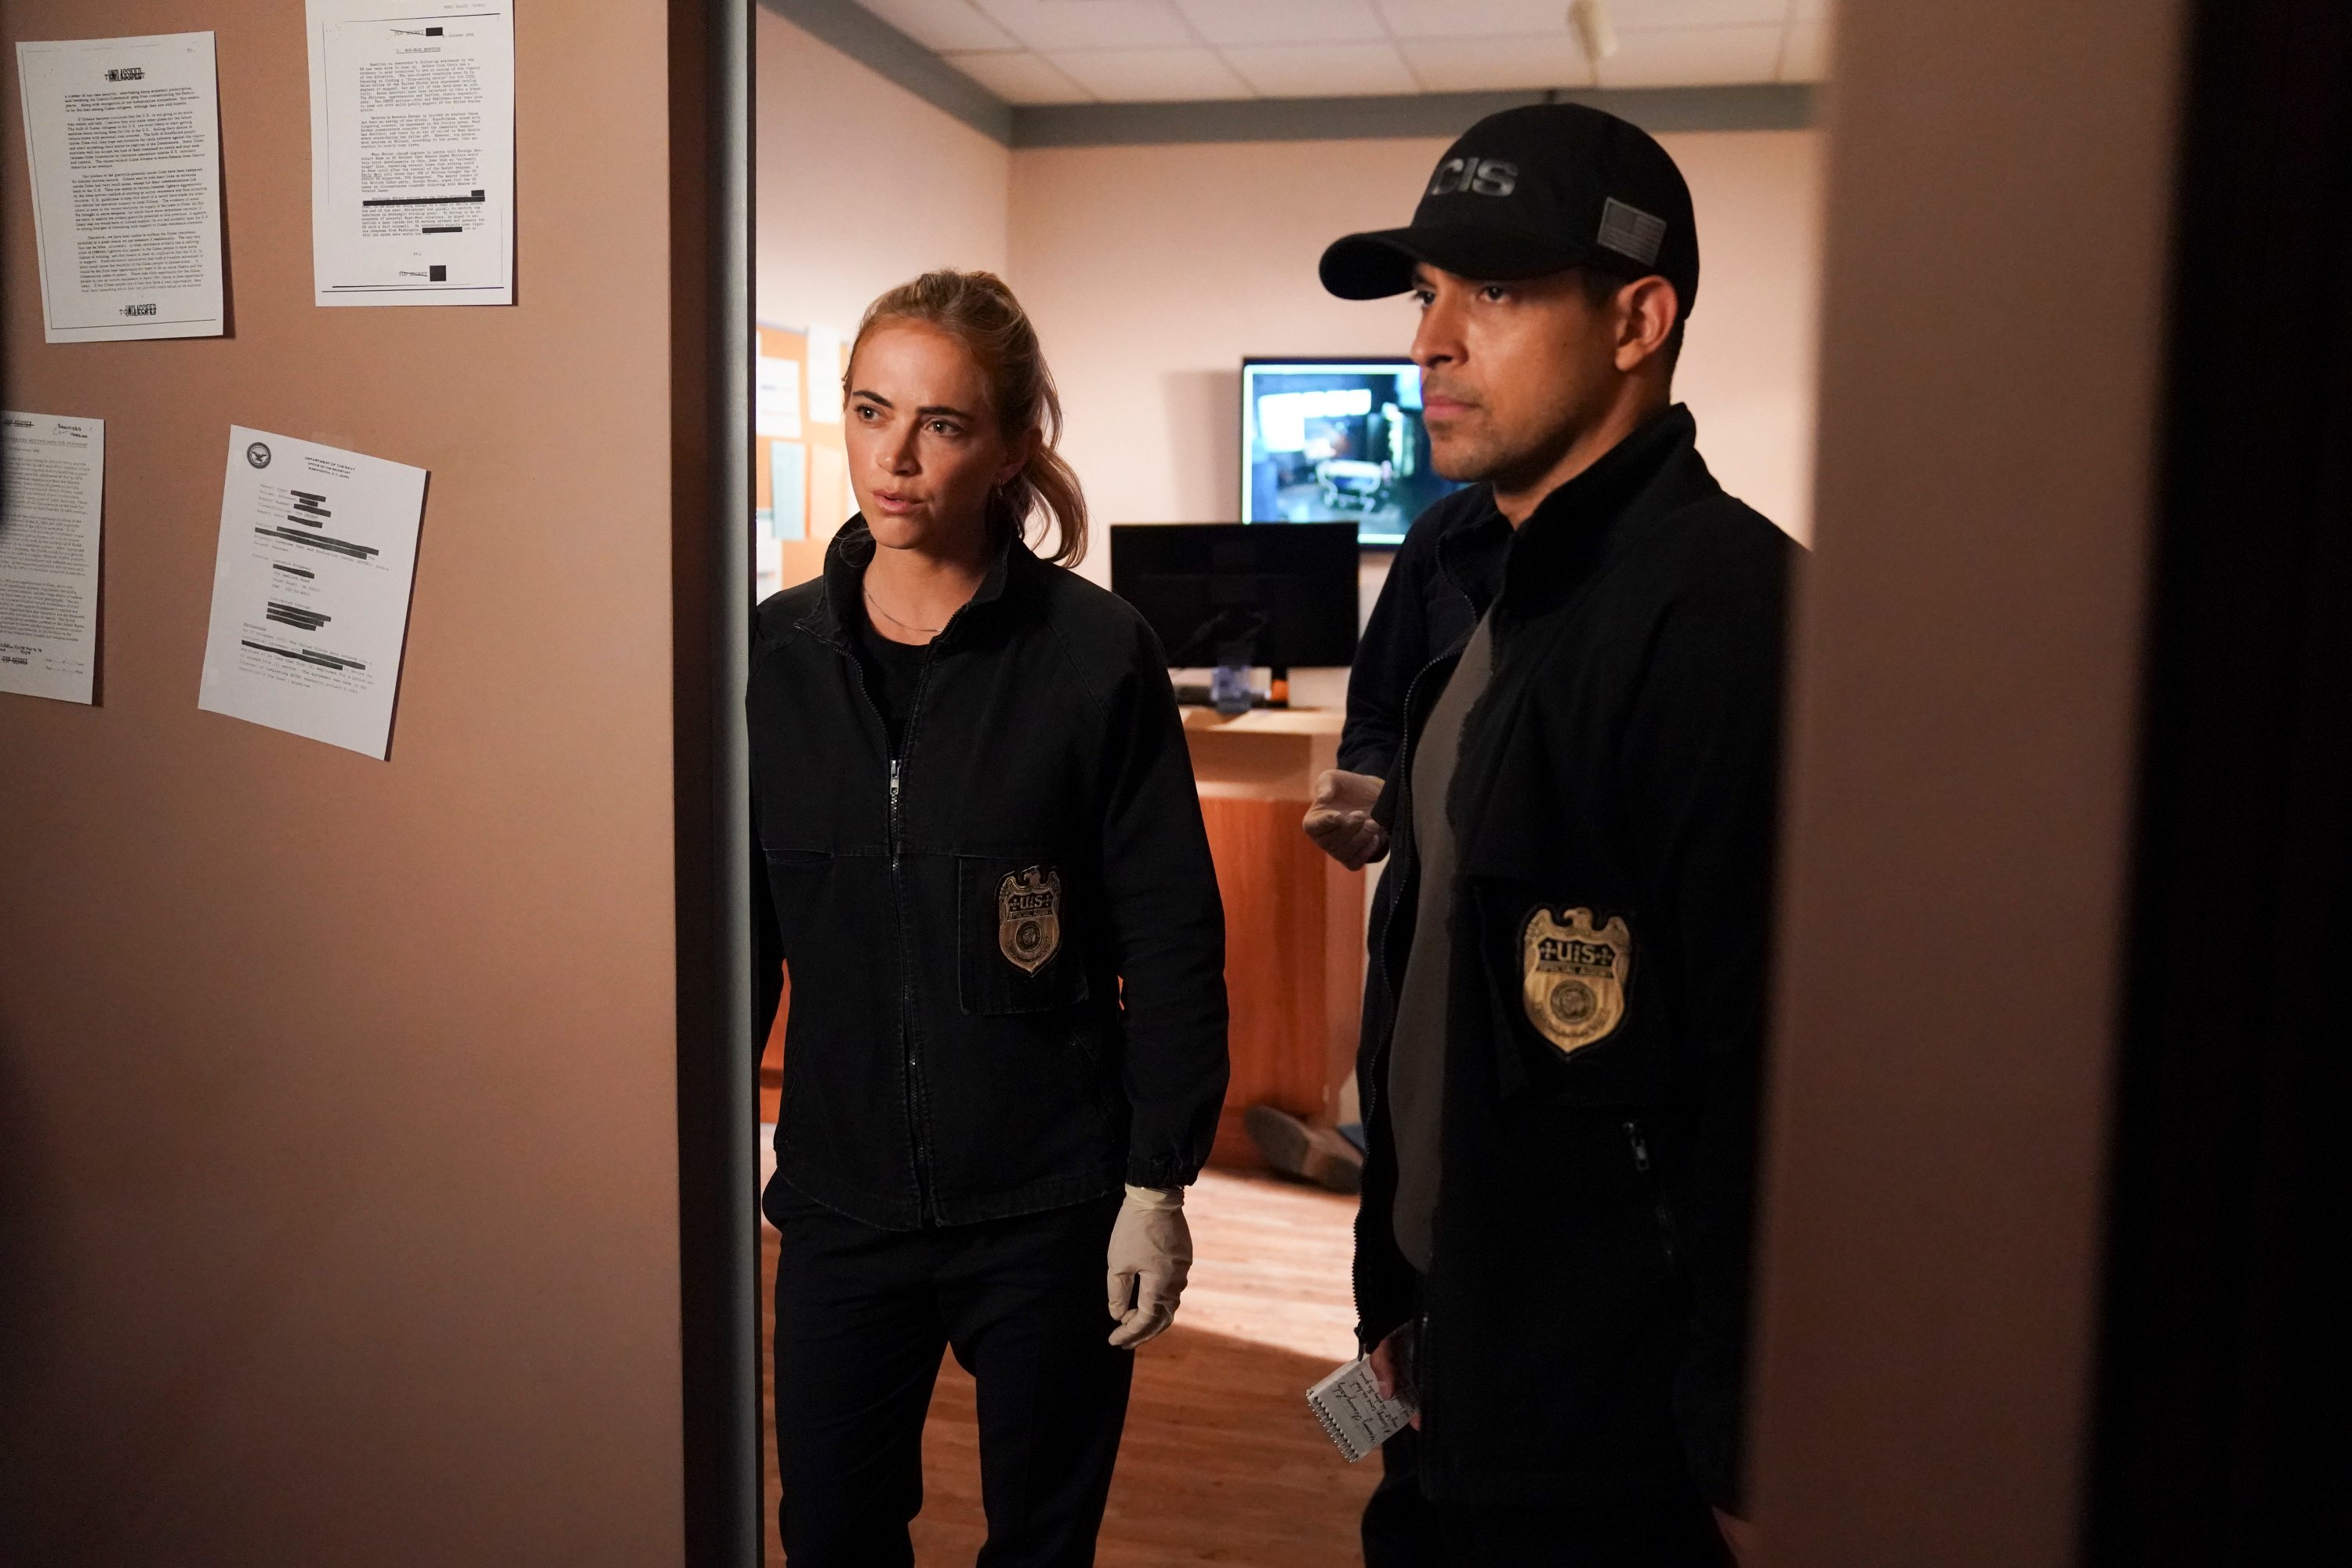 Bishop and Torres investigate. |  Sonja Flemming/CBS via Getty Images